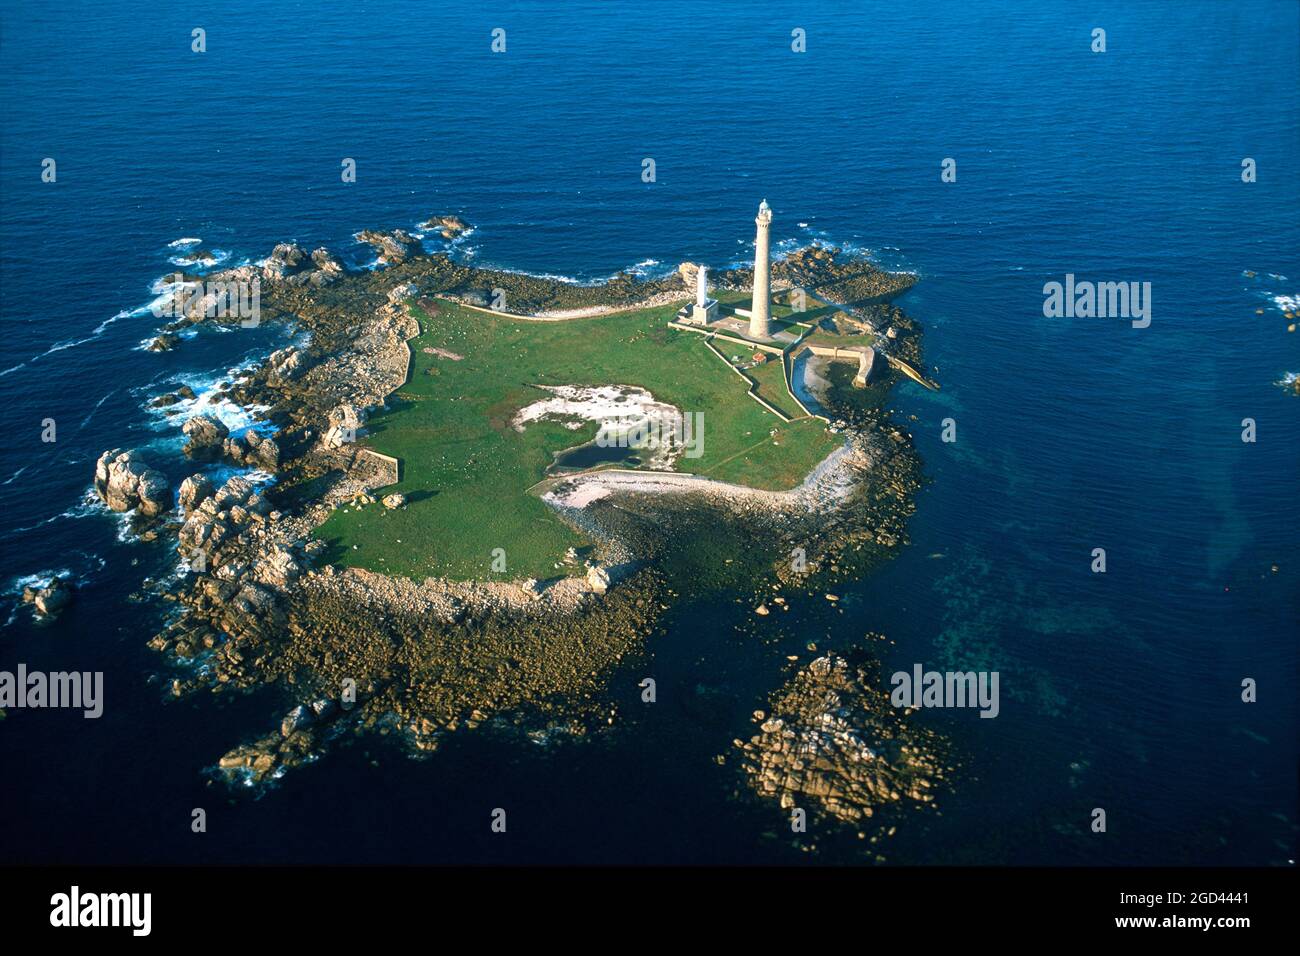 FINISTERE (29) BRITTANY, AERIAL VIEW OF THE VIRGIN ISLAND LIGHTHOUSE WAS BUILT IN 1897, 1902 IN THE LILIA ARCHIPELAGO, IT IS A HISTORIC MONUMENT, FRAN Stock Photo